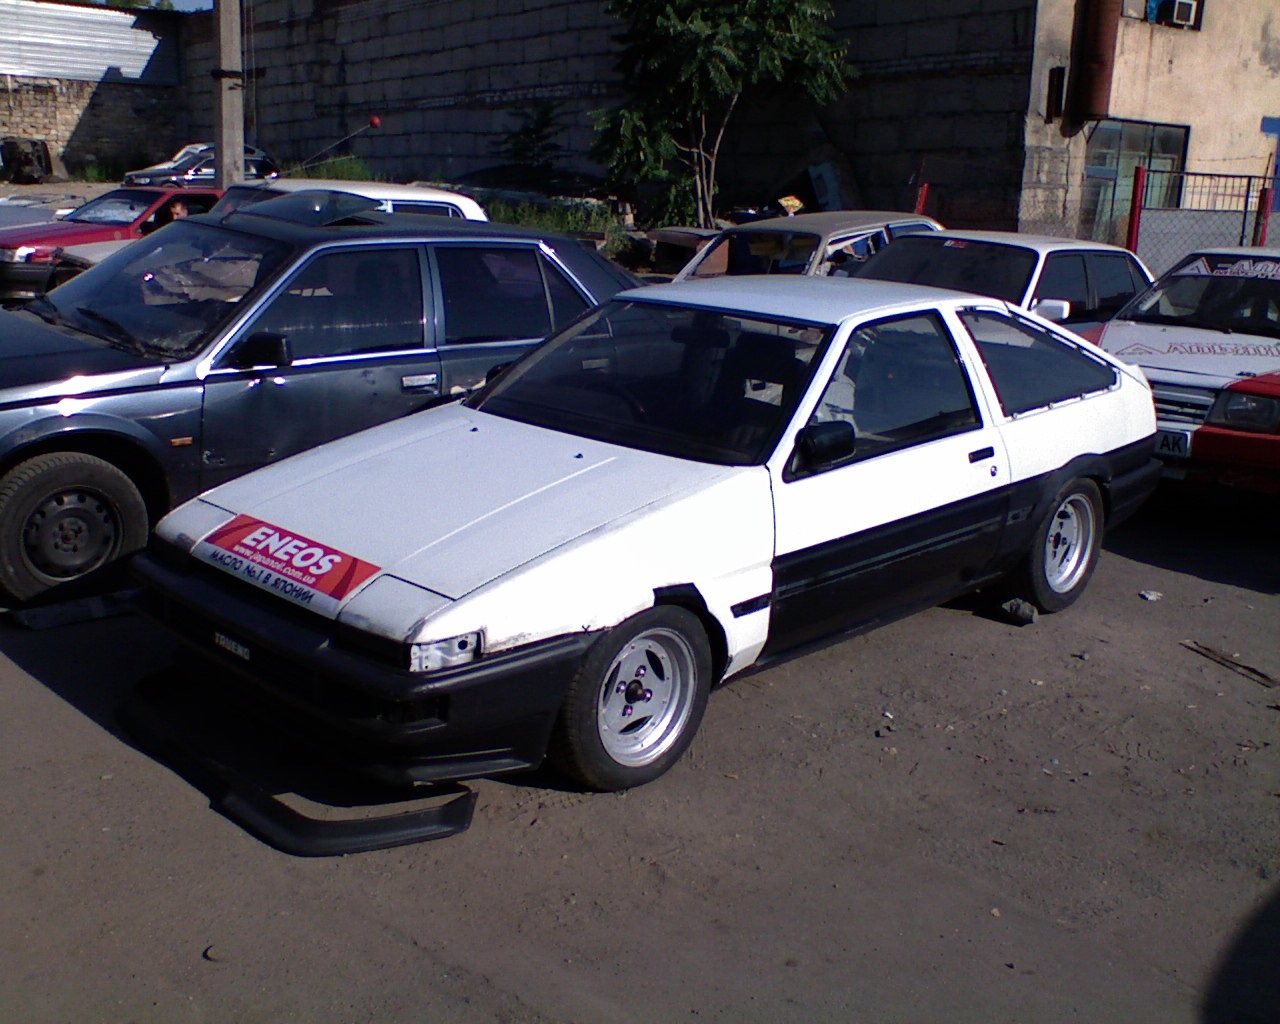 Tuning without picking up or how it happens  not for the faint of heart - Toyota Sprinter Trueno 15 L 1987